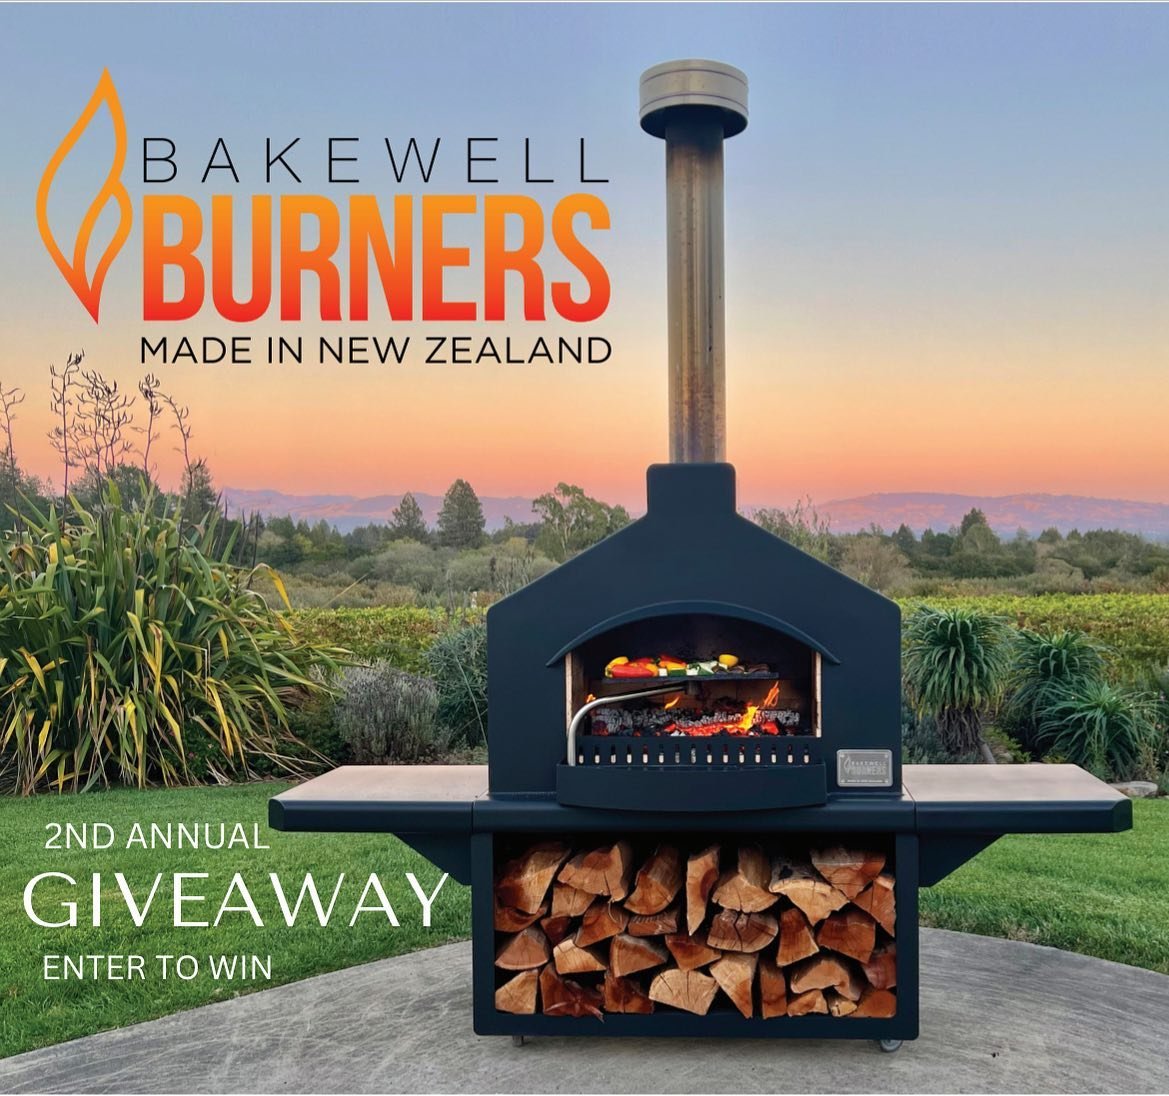 ✨✨2nd ANNUAL GIVEAWAY ✨✨

Here is your opportunity to win an exclusive, handcrafted Bakewell!

Giveaway starts now and ends July 20 at midnight PST.

To be entered (complete 1-4 below):
1️⃣Follow us @BakewellBurners
2️⃣Like and Save this post
3️⃣Shar